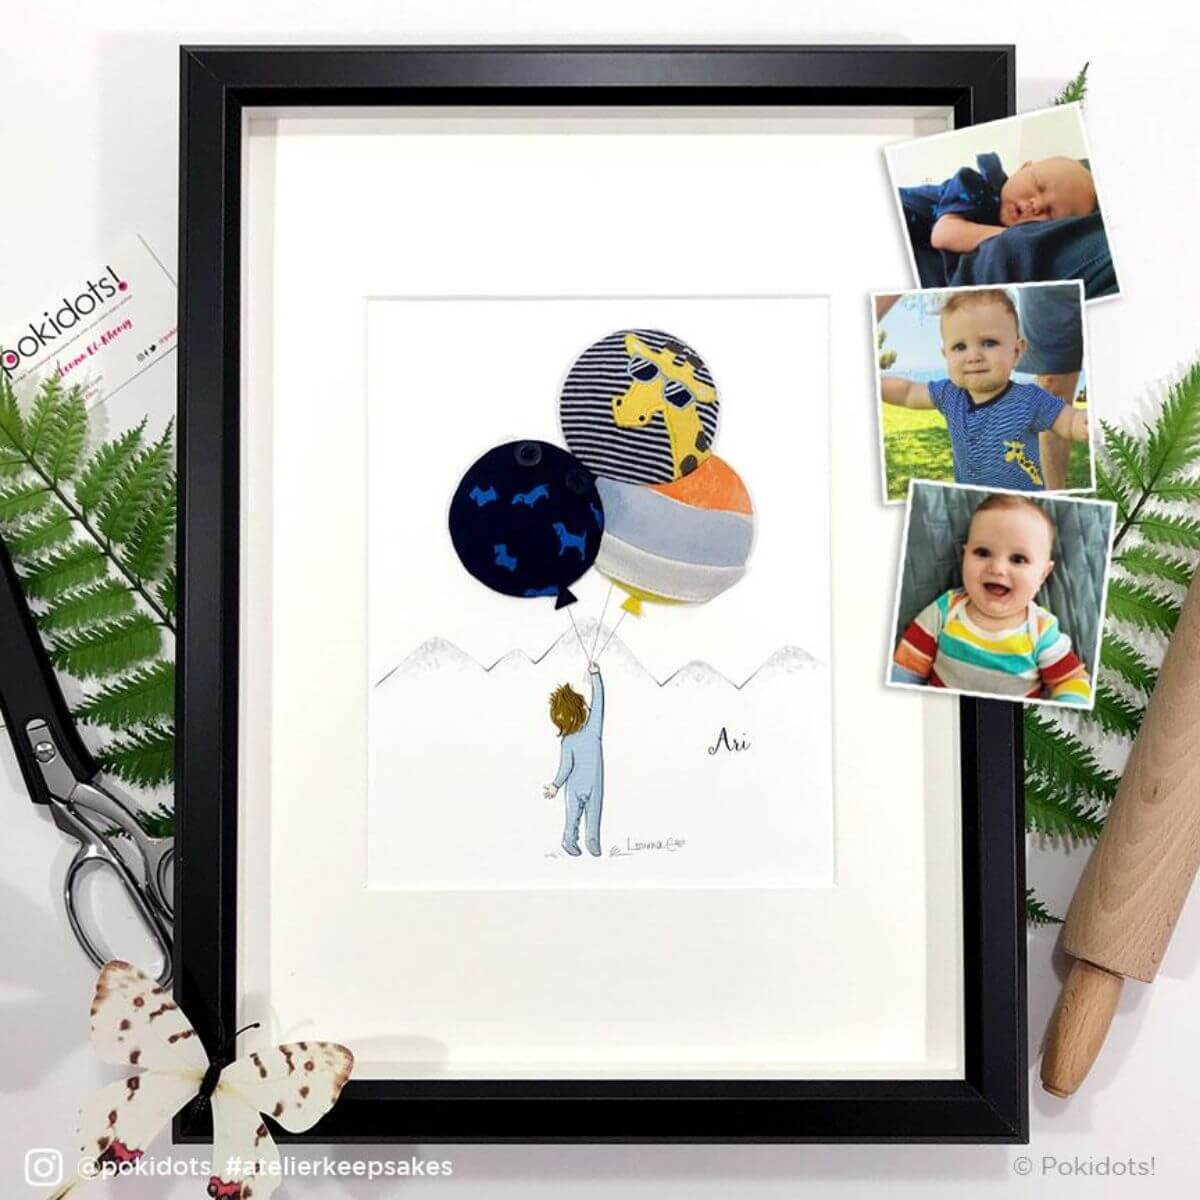 An example of a keepsake illustration & artwork crafted from sentimental baby clothes created by Louma for a client.